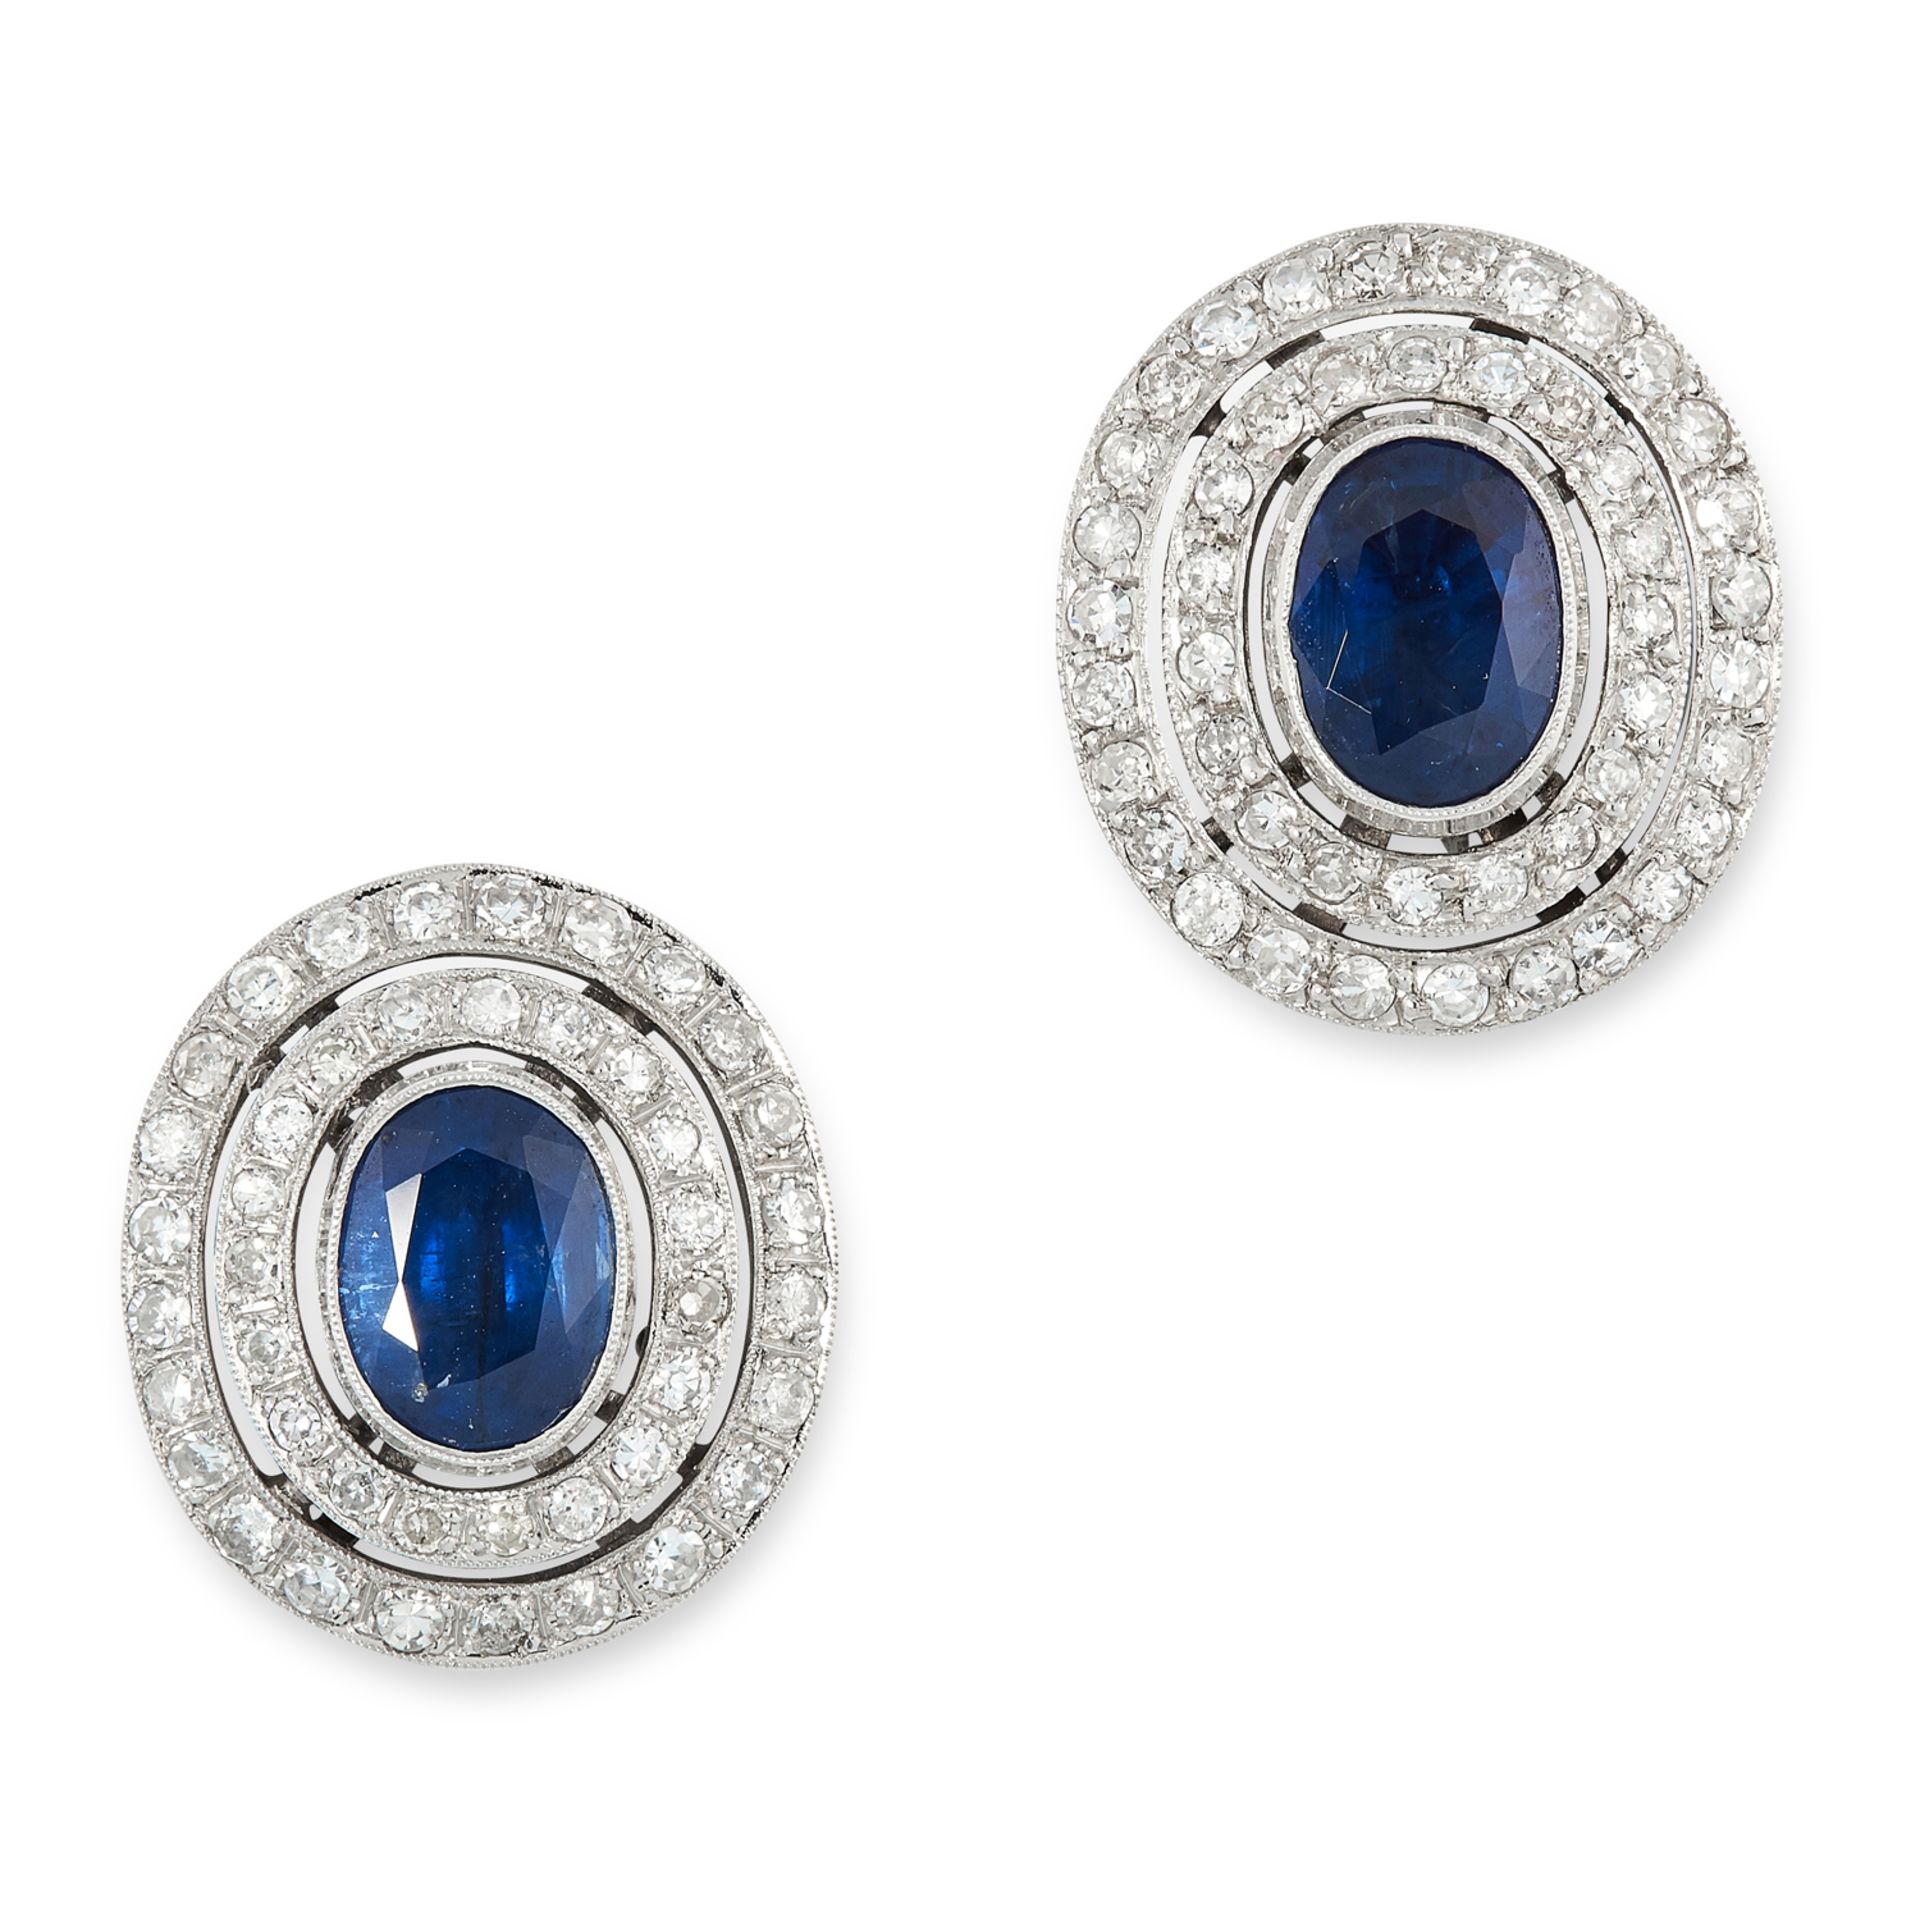 A PAIR OF SAPPHIRE AND DIAMOND CLUSTER EARRINGS in 18ct gold, comprising of an oval cut sapphire